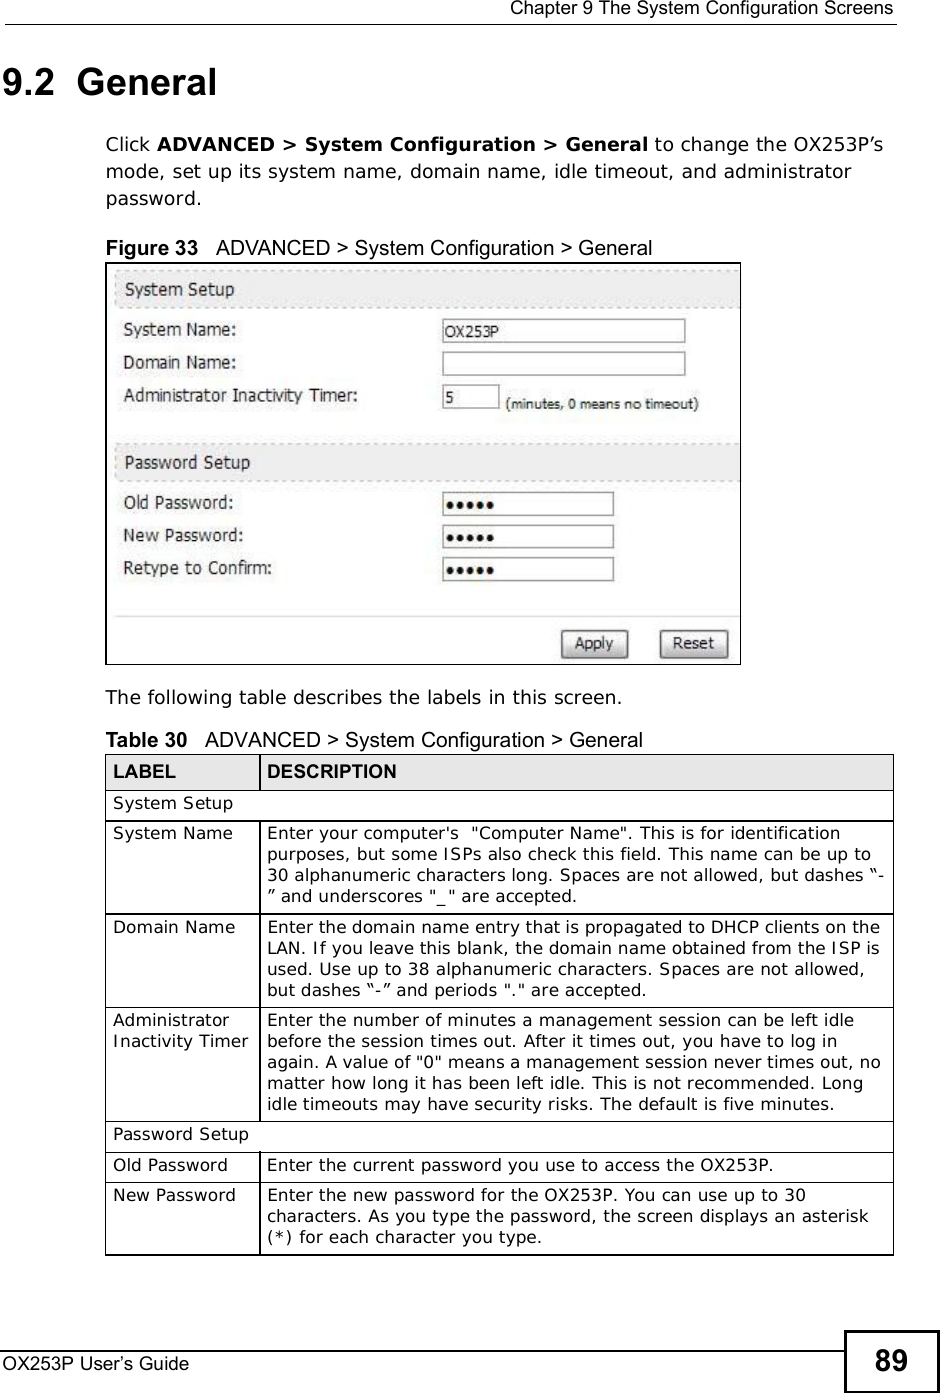  Chapter 9The System Configuration ScreensOX253P User’s Guide 899.2  General Click ADVANCED &gt; System Configuration &gt; General to change the OX253P’s mode, set up its system name, domain name, idle timeout, and administrator password.Figure 33   ADVANCED &gt; System Configuration &gt; GeneralThe following table describes the labels in this screen.Table 30   ADVANCED &gt; System Configuration &gt; GeneralLABEL DESCRIPTIONSystem SetupSystem NameEnter your computer&apos;s  &quot;Computer Name&quot;. This is for identification purposes, but some ISPs also check this field. This name can be up to 30 alphanumeric characters long. Spaces are not allowed, but dashes “-” and underscores &quot;_&quot; are accepted.Domain NameEnter the domain name entry that is propagated to DHCP clients on the LAN. If you leave this blank, the domain name obtained from the ISP is used. Use up to 38 alphanumeric characters. Spaces are not allowed, but dashes “-” and periods &quot;.&quot; are accepted.Administrator Inactivity Timer Enter the number of minutes a management session can be left idle before the session times out. After it times out, you have to log in again. A value of &quot;0&quot; means a management session never times out, no matter how long it has been left idle. This is not recommended. Long idle timeouts may have security risks. The default is five minutes. Password SetupOld PasswordEnter the current password you use to access the OX253P.New PasswordEnter the new password for the OX253P. You can use up to 30 characters. As you type the password, the screen displays an asterisk (*) for each character you type.